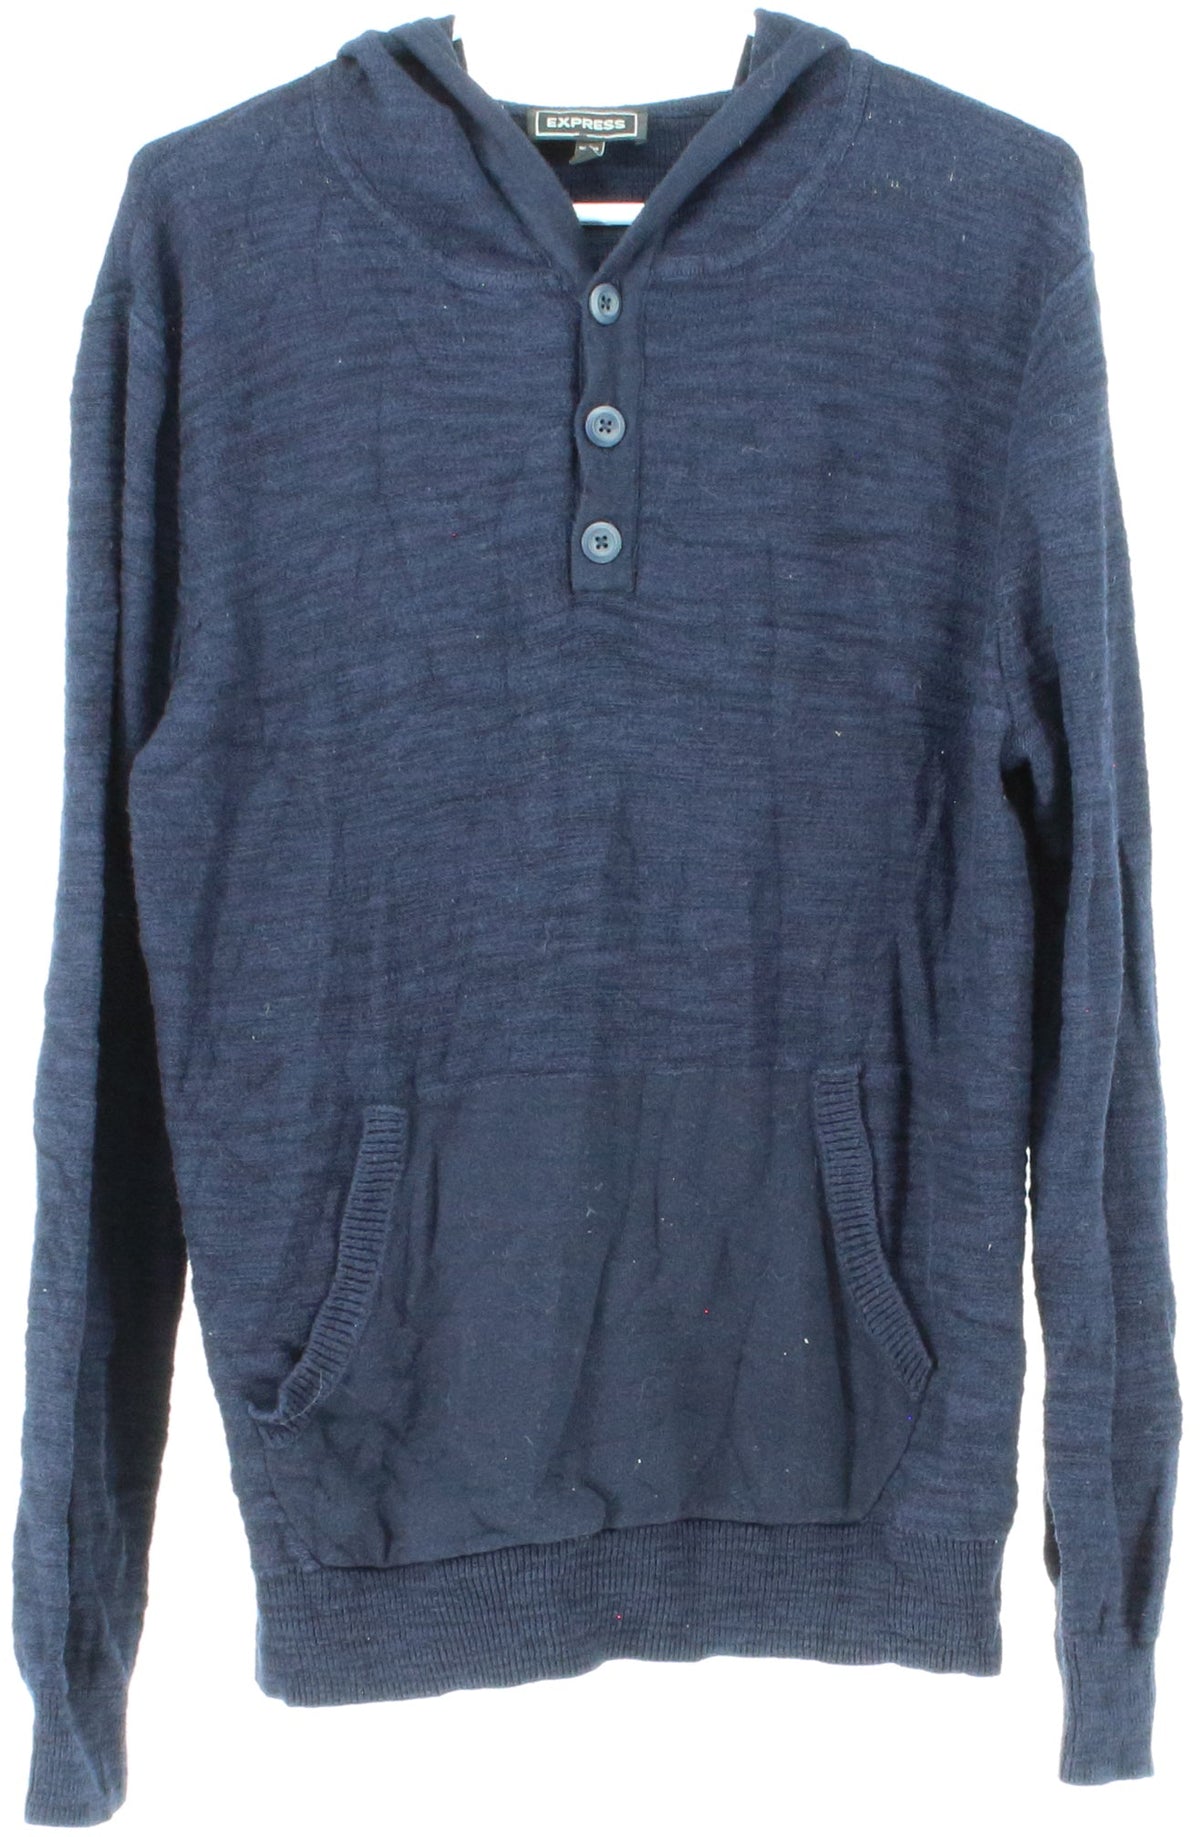 Express Navy Blue Front Buttons Hooded Men's Sweater